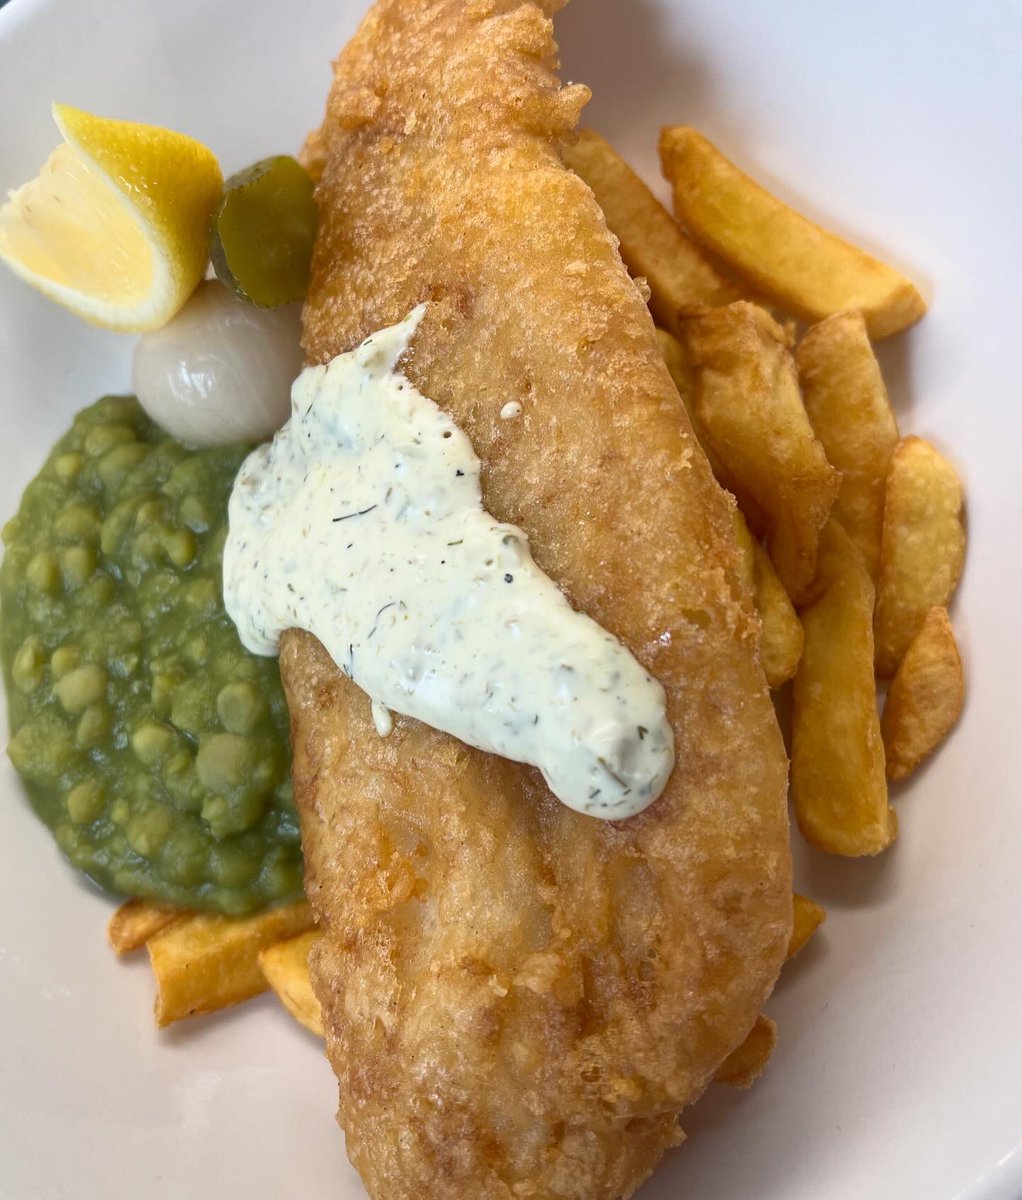 New dishes on our menu today in the EDUkitchen! -Tandoori Chicken, Naan Bread & Mango Chutney -Cheddar and Potato Cakes, Poached Egg & Tarragon Sauce -Friday Fish & Chips with all the trimmings @LoveBritishFood #greathospitalfood